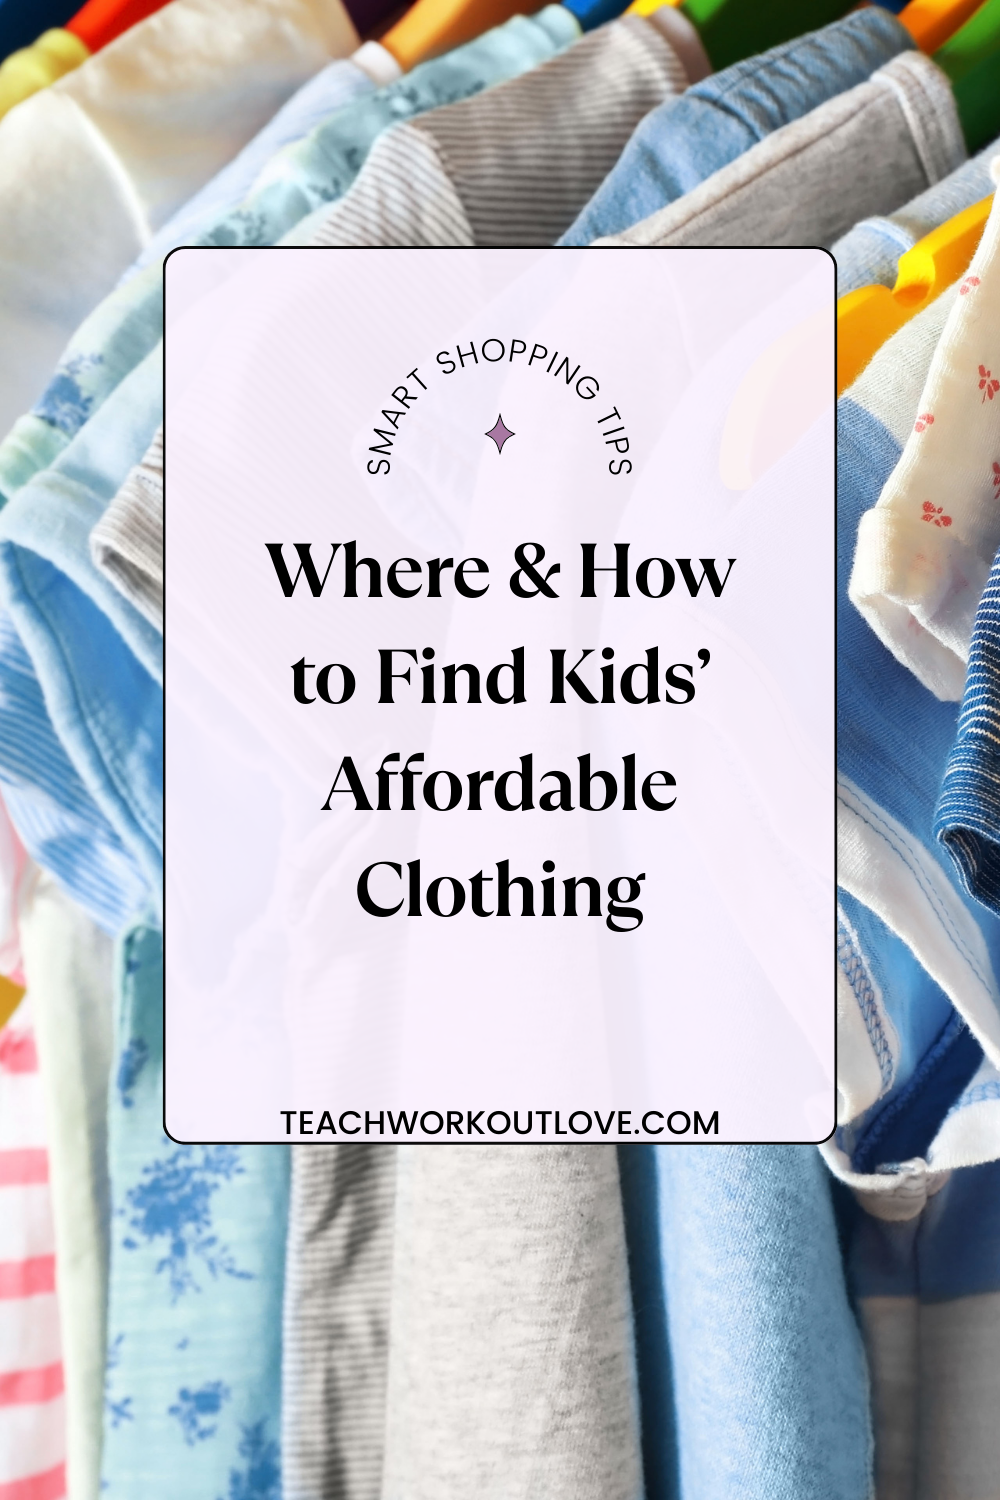 Looking for clothing for your kids? We have some great tips on how to find affordable kids' clothing when shopping. 